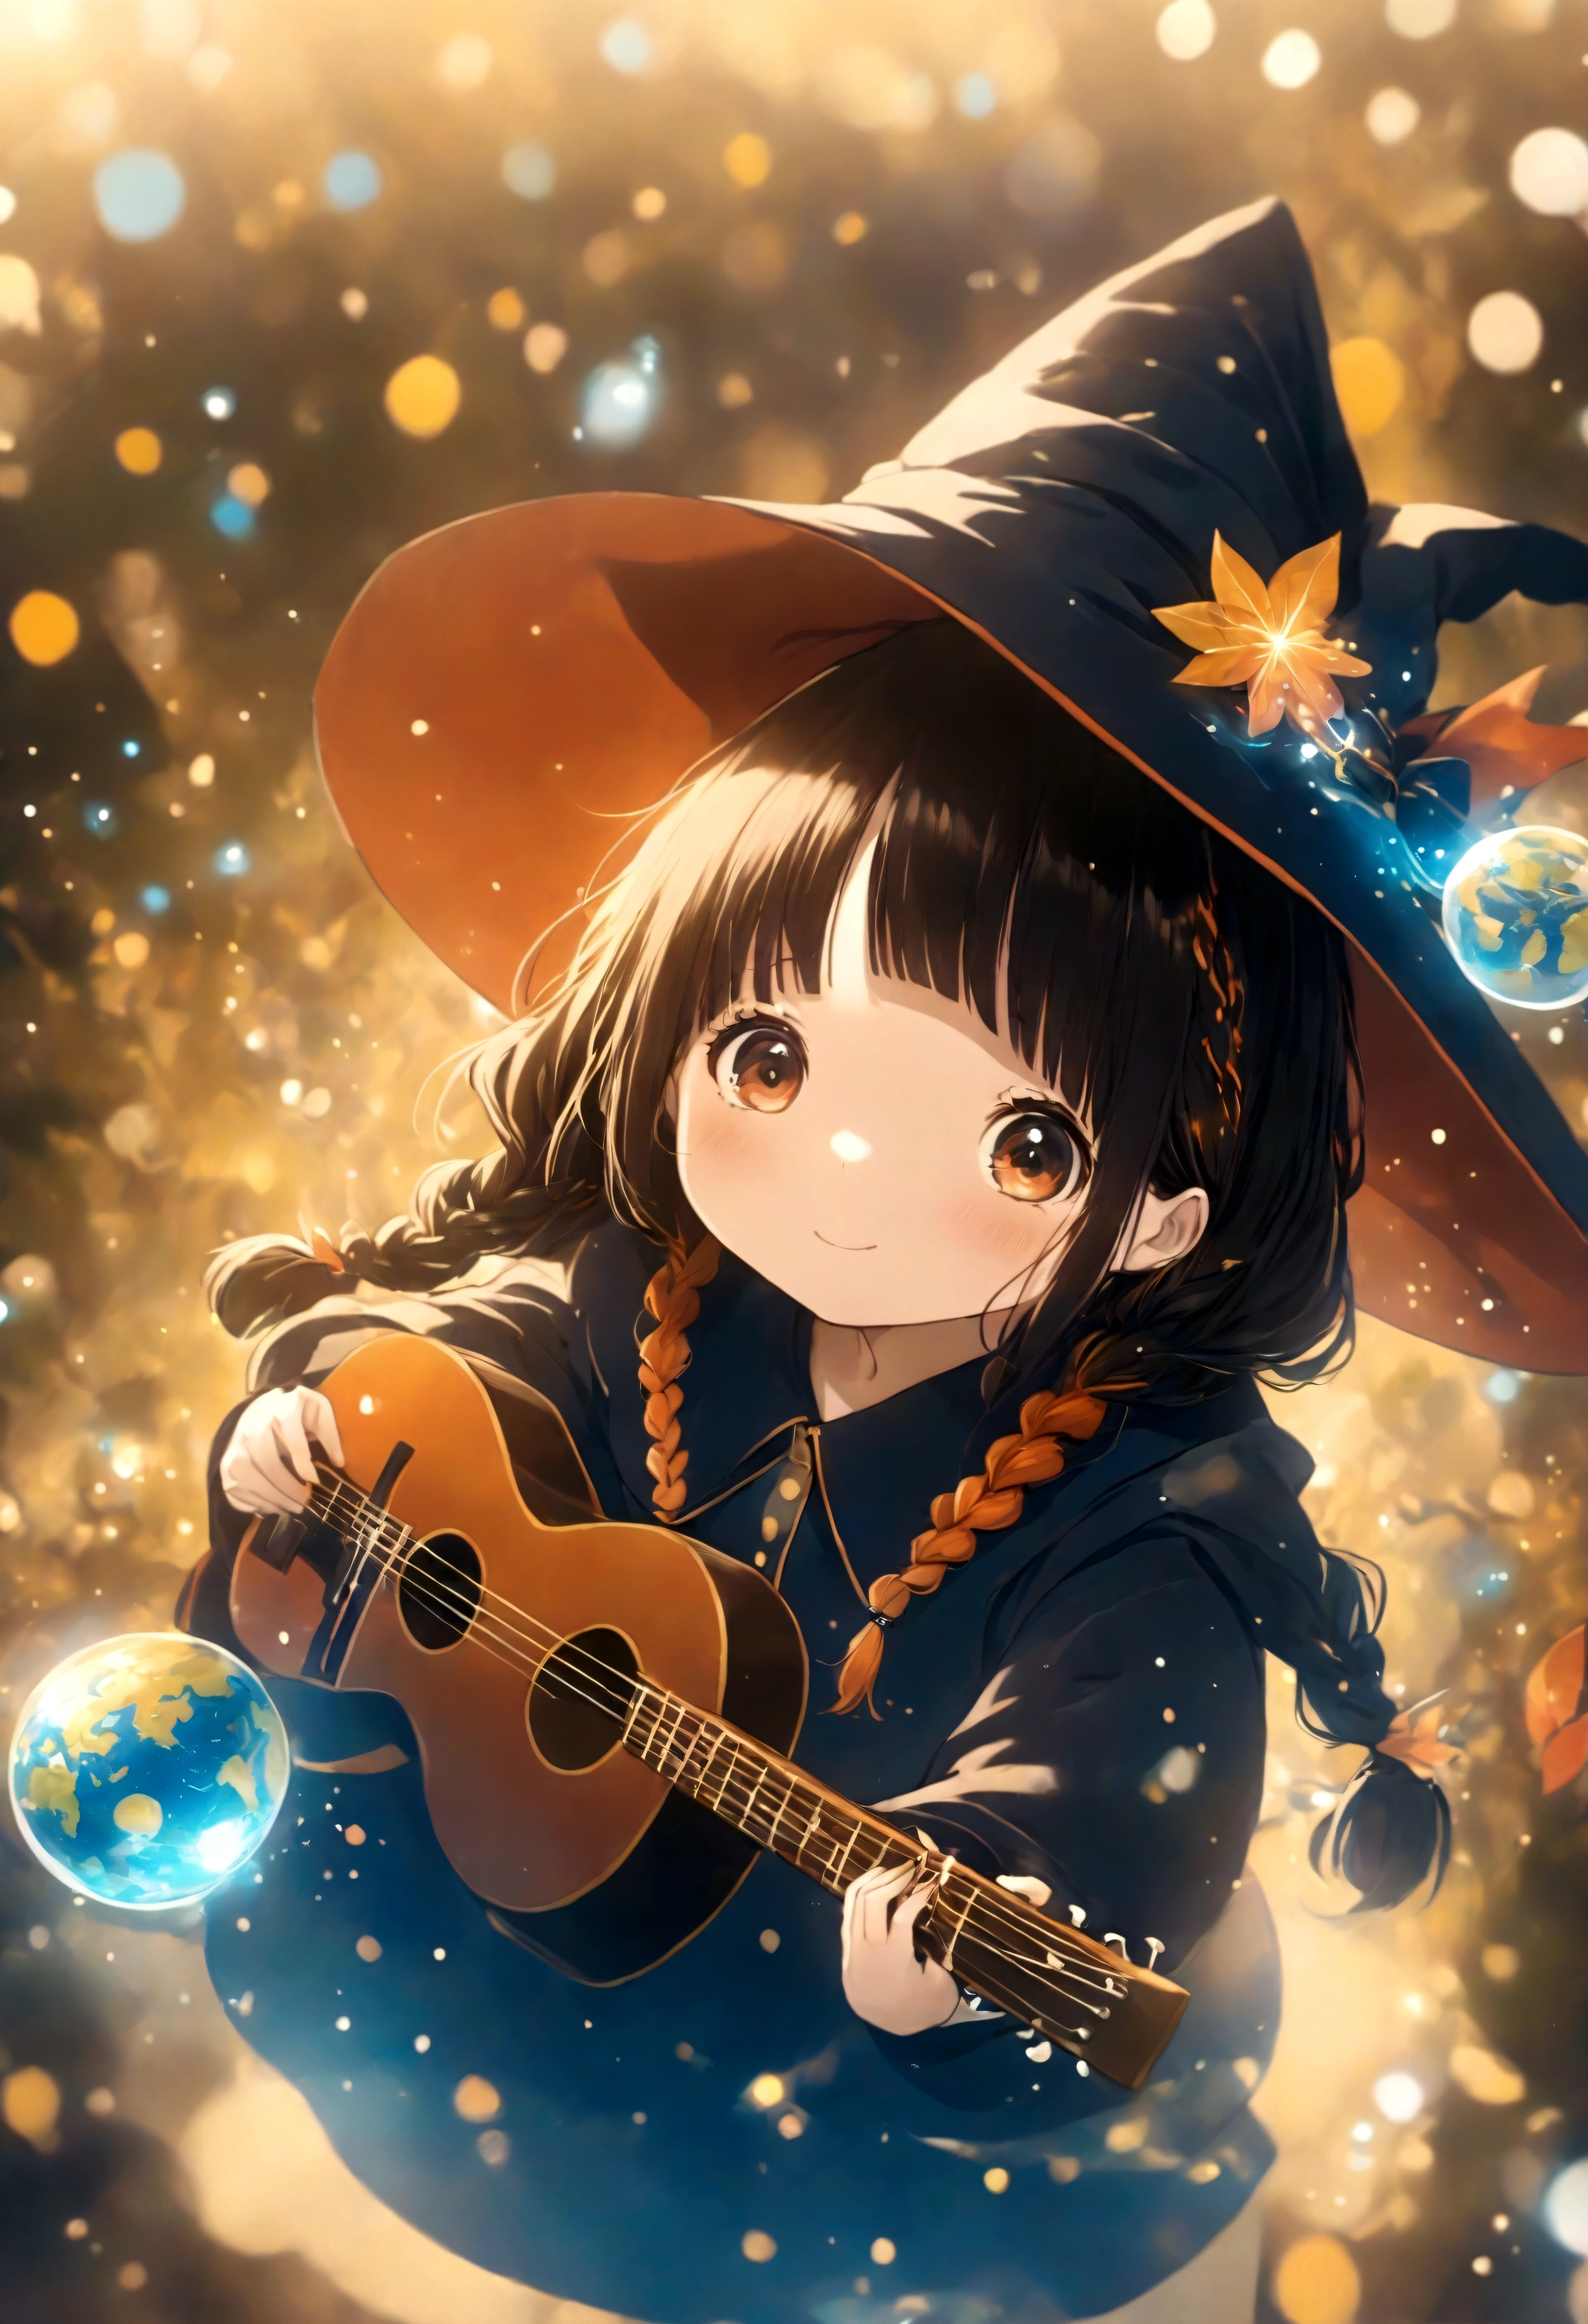 With red twin braids、, Cute anime style Hagrid, a young witch, Anime cute art style, Marisa Kirisame, Witch Girl, Anime Characters, as an Anime Characters, Has magical powers, young wizard, Different world, holding a guitar，ultra wide angle lens
